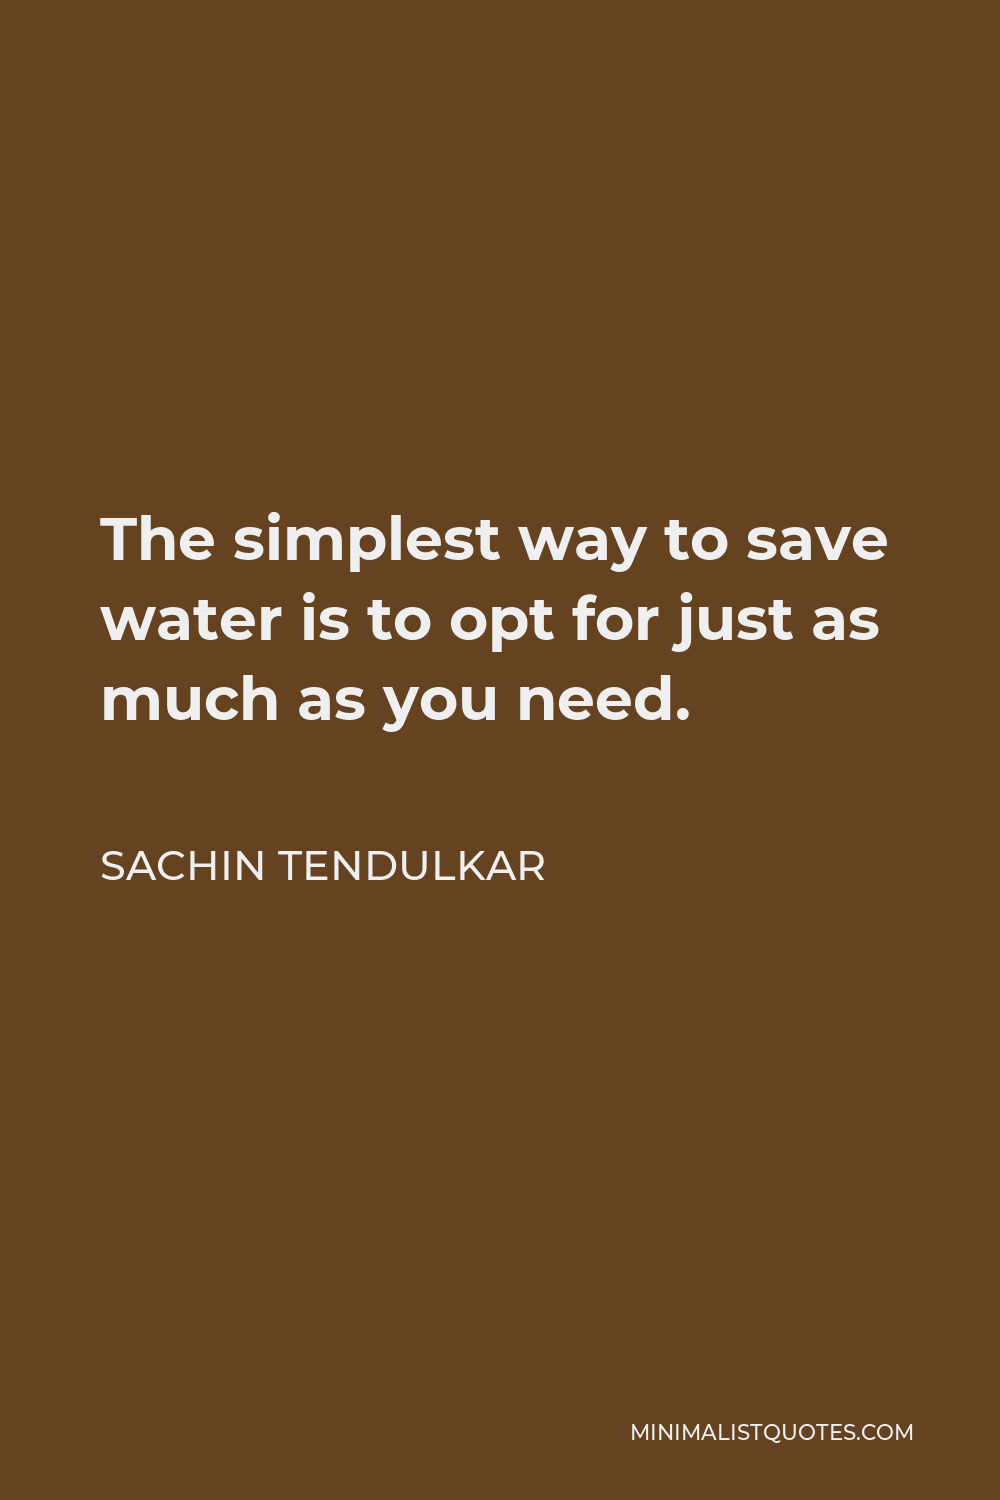 Sachin Tendulkar Quote - The simplest way to save water is to opt for just as much as you need.